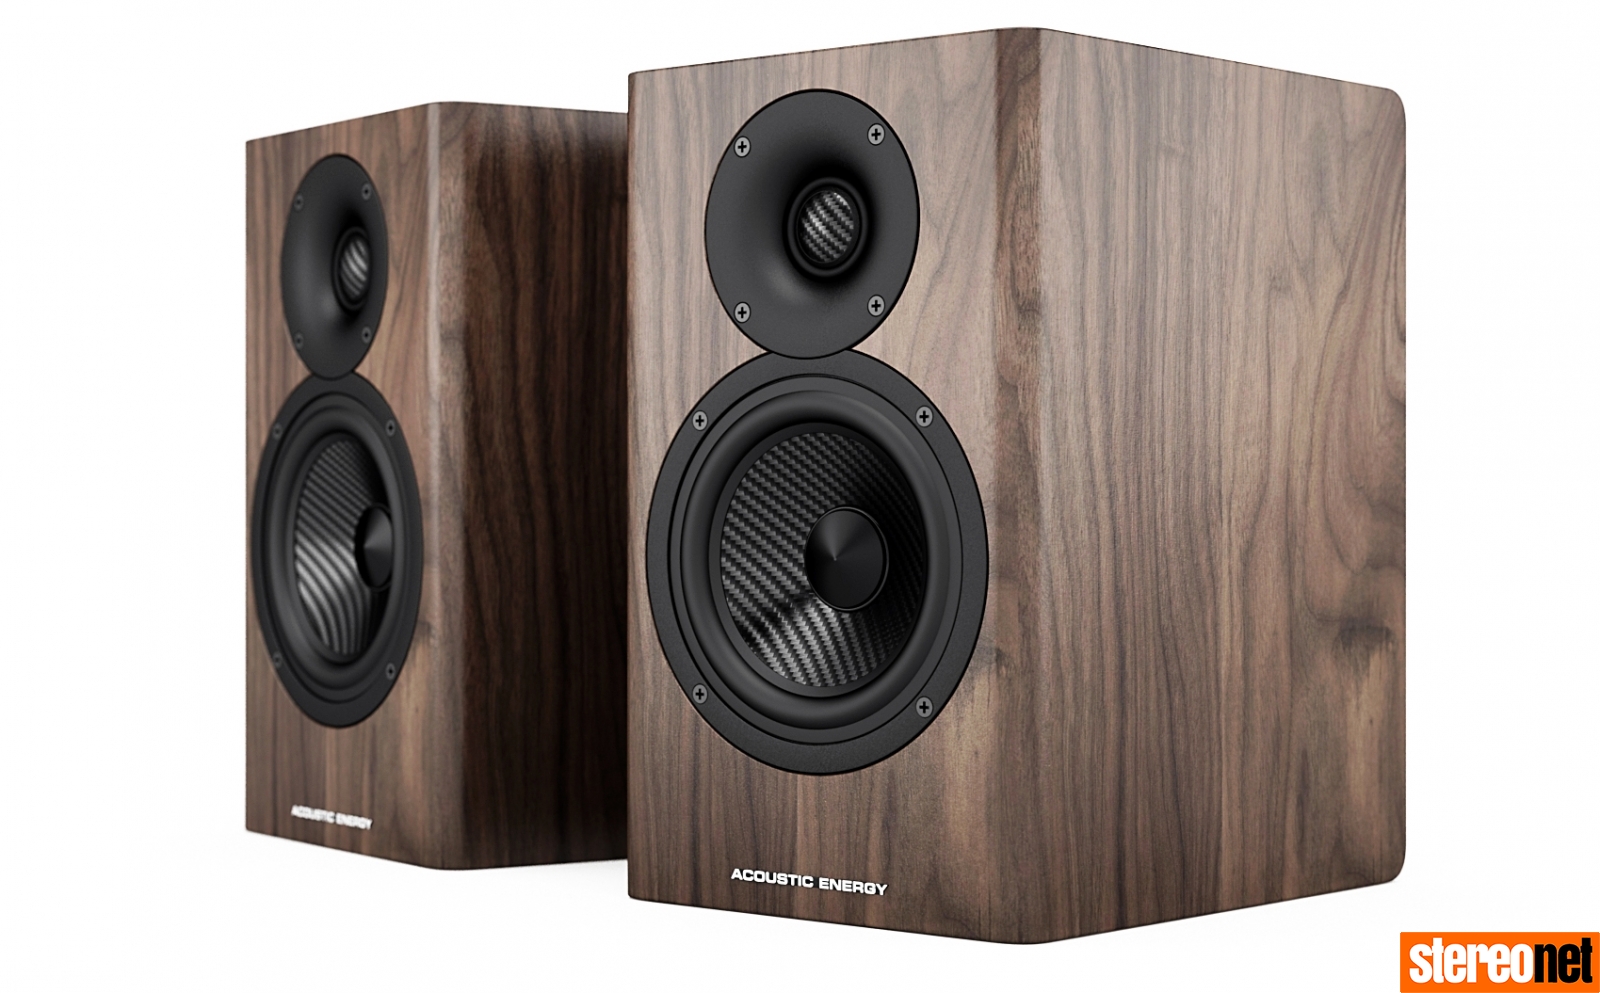 Acoustic Energy AE500 Review